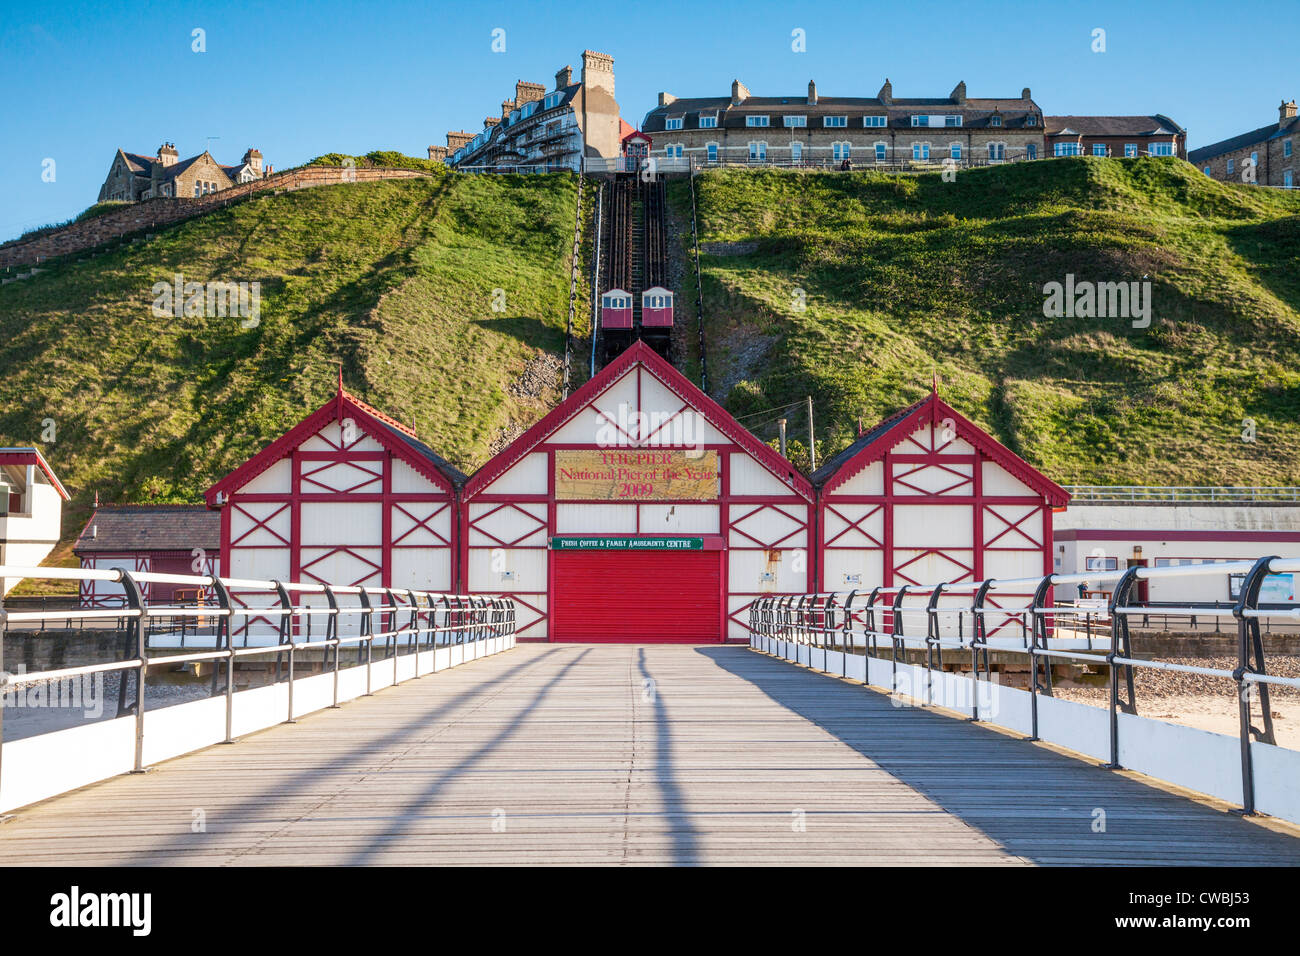 Saltburn pier and cliff lift. Stock Photo